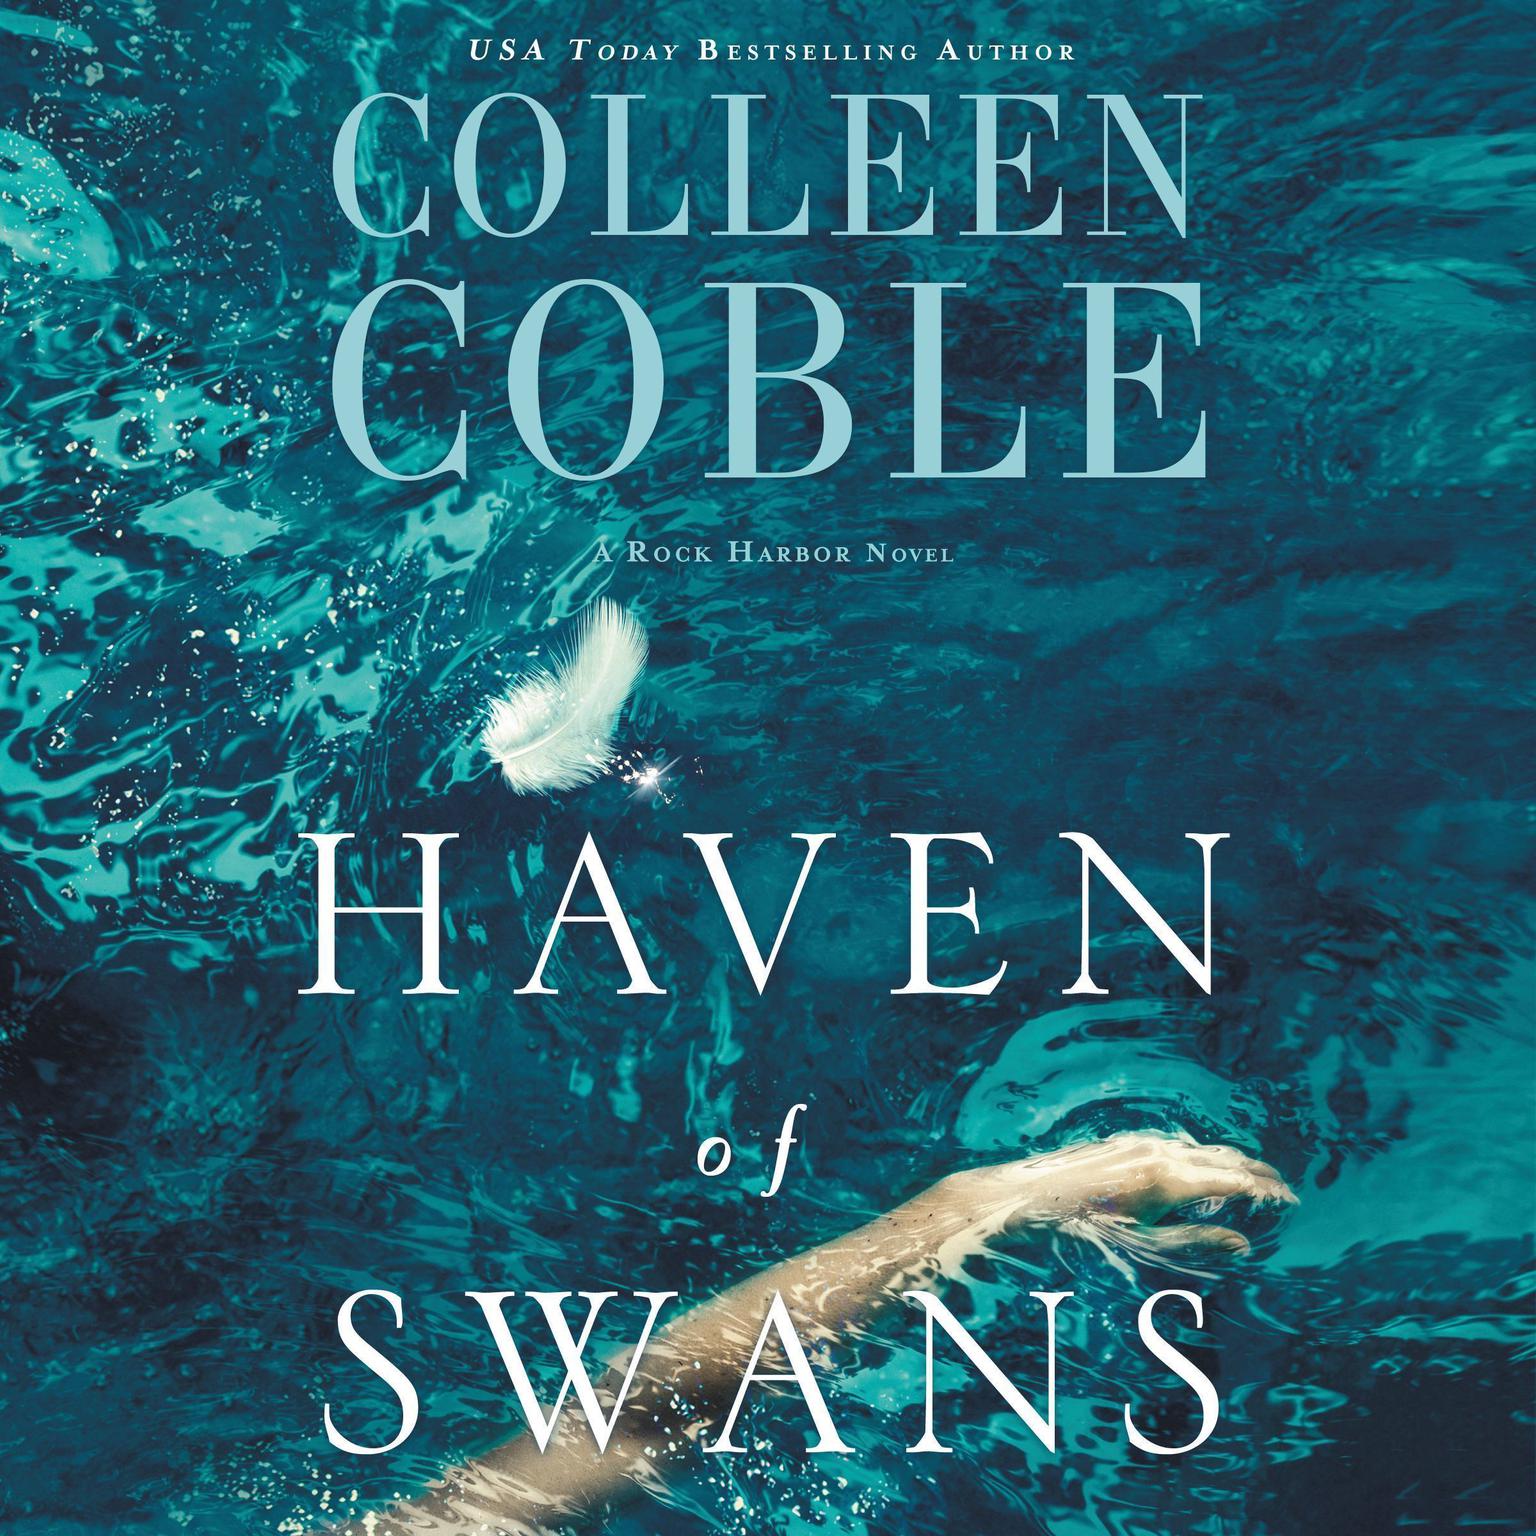 Haven of Swans: (previously published as Abomination) Audiobook, by Colleen Coble